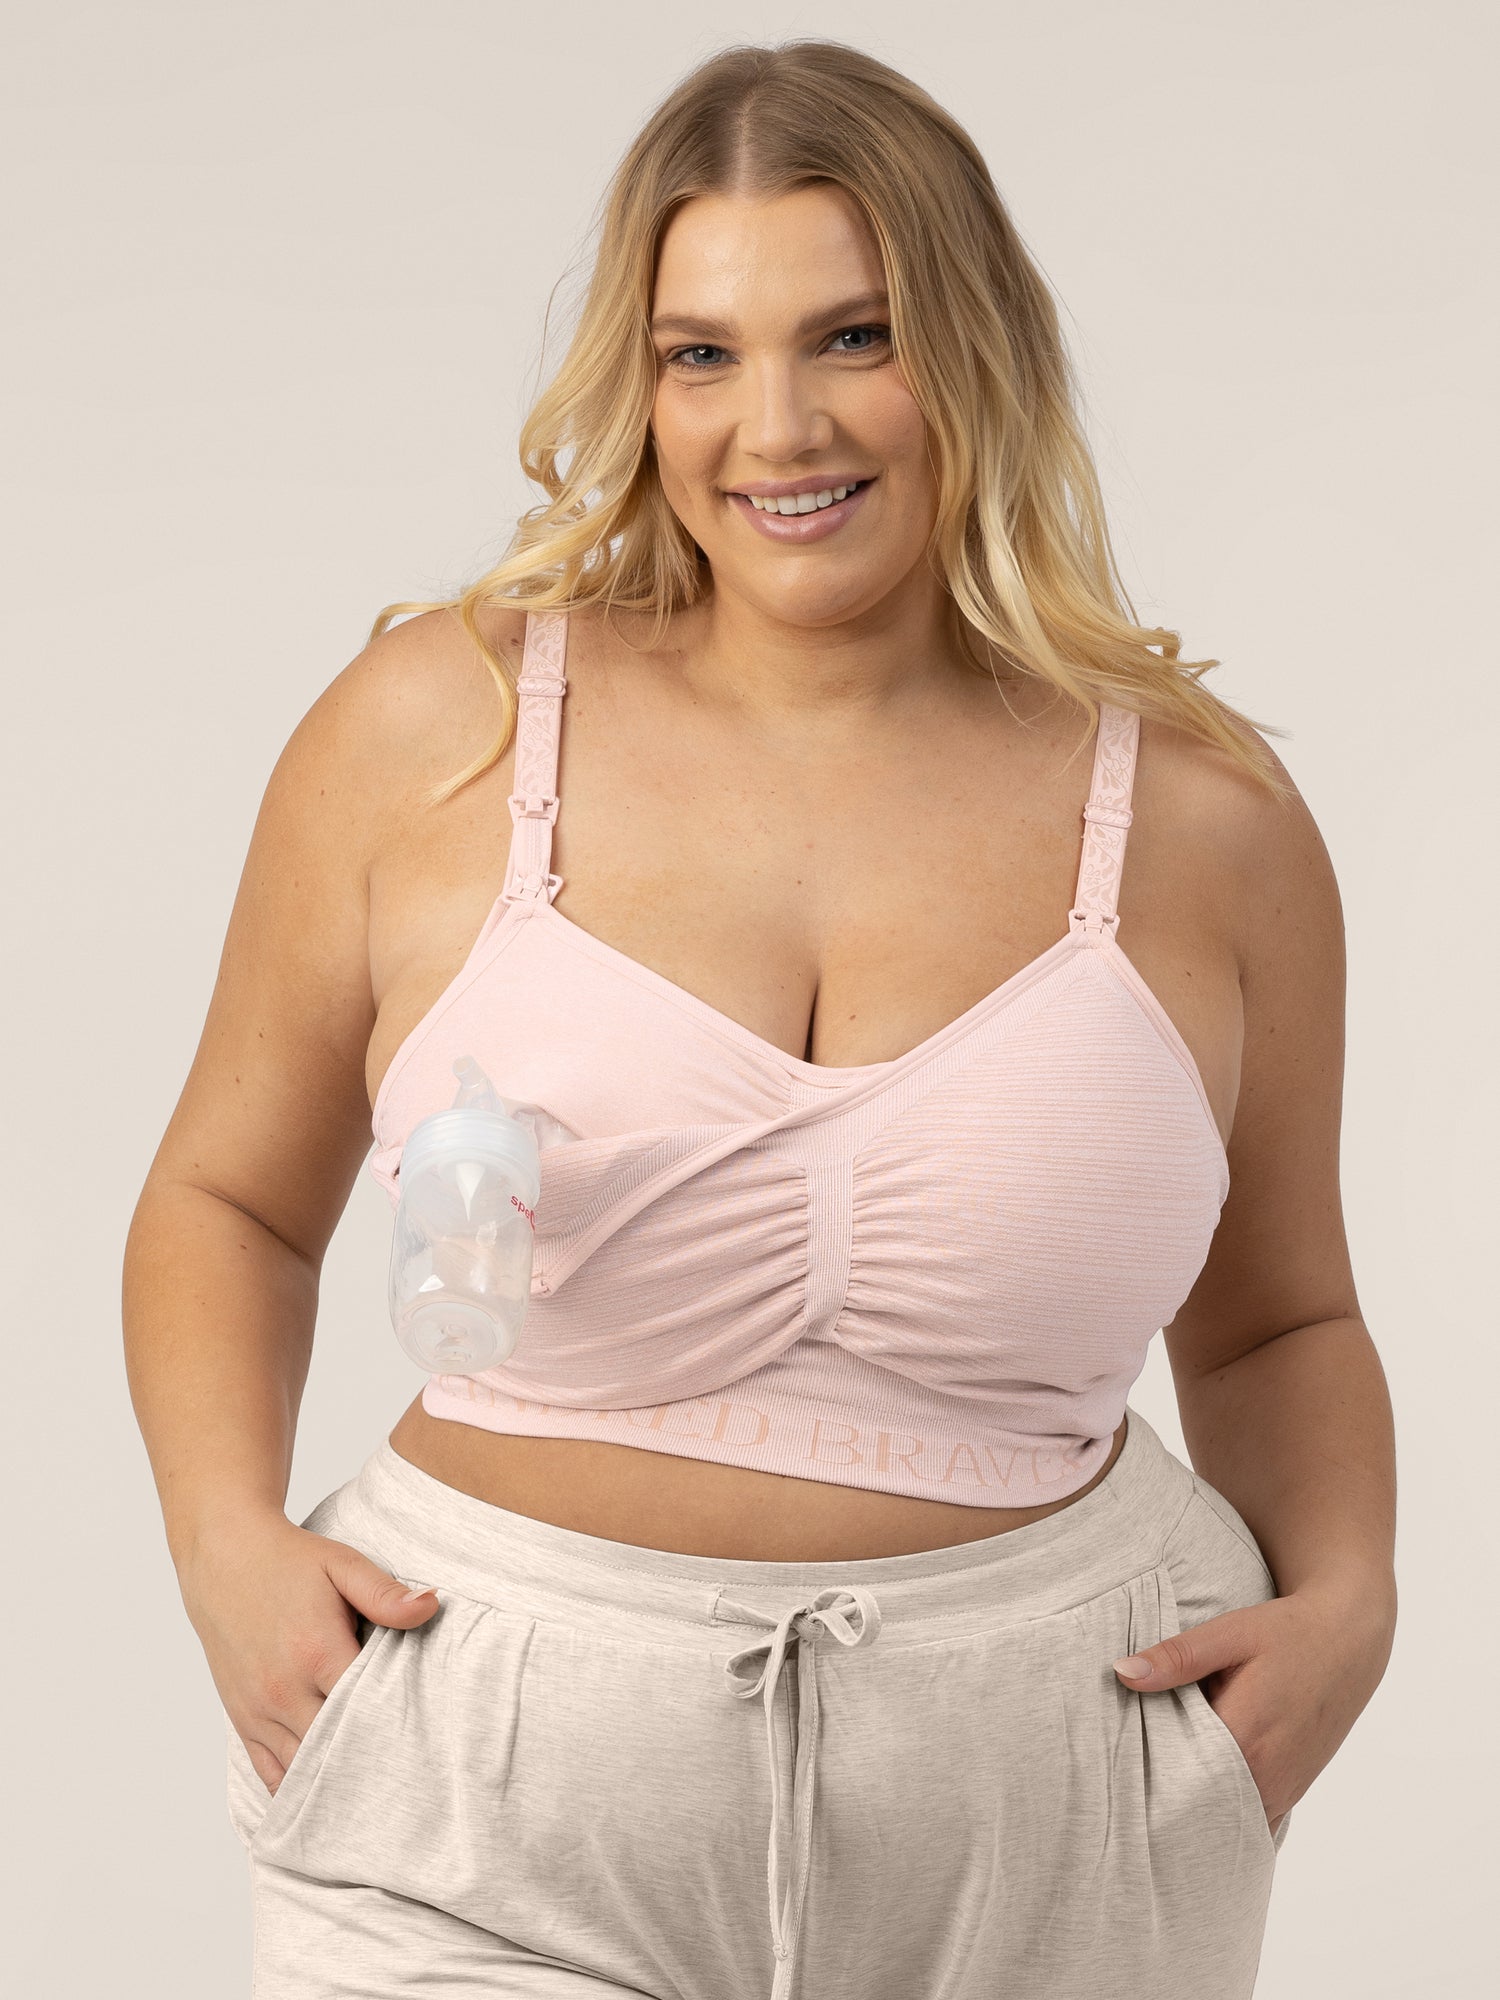 Kindred Bravely Plus Size Busty Sublime Hands-free Pumping & Nursing Sports  Bra S in Blue